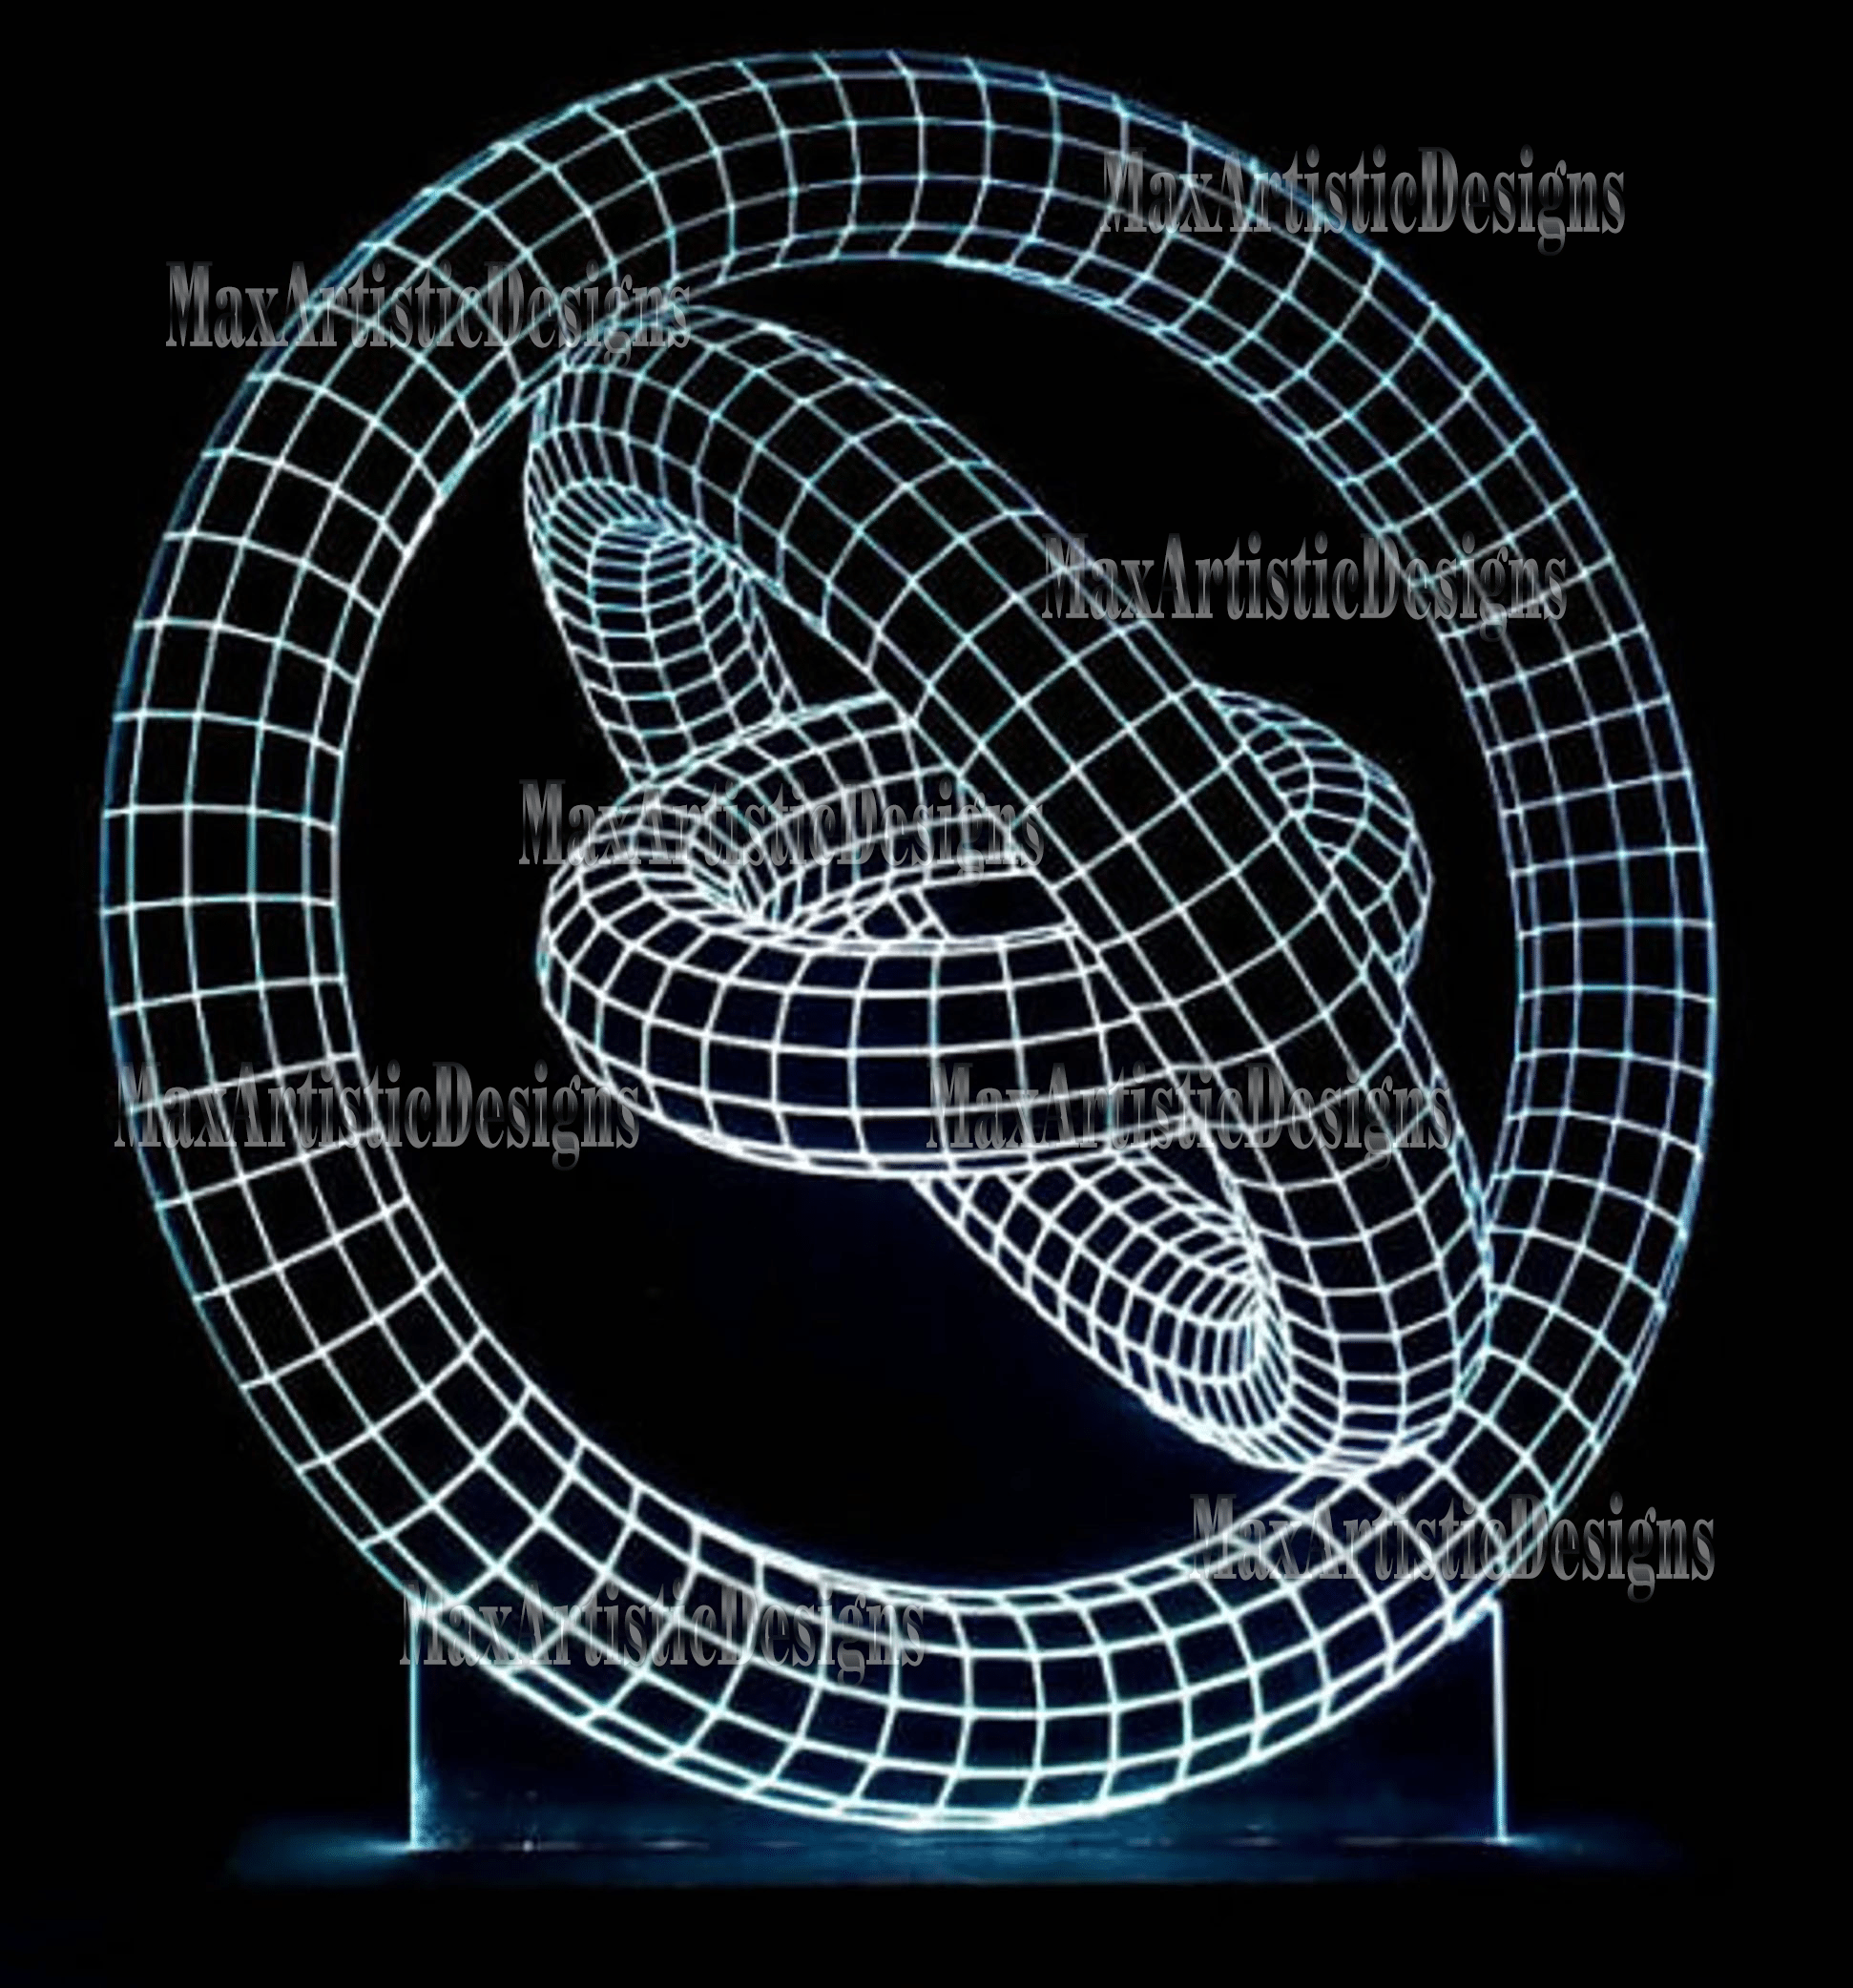 50+ cnc vectors for 3d acrylic illusionist led lamps in pdf dxf jpg file formats for cnc and laser cut machine